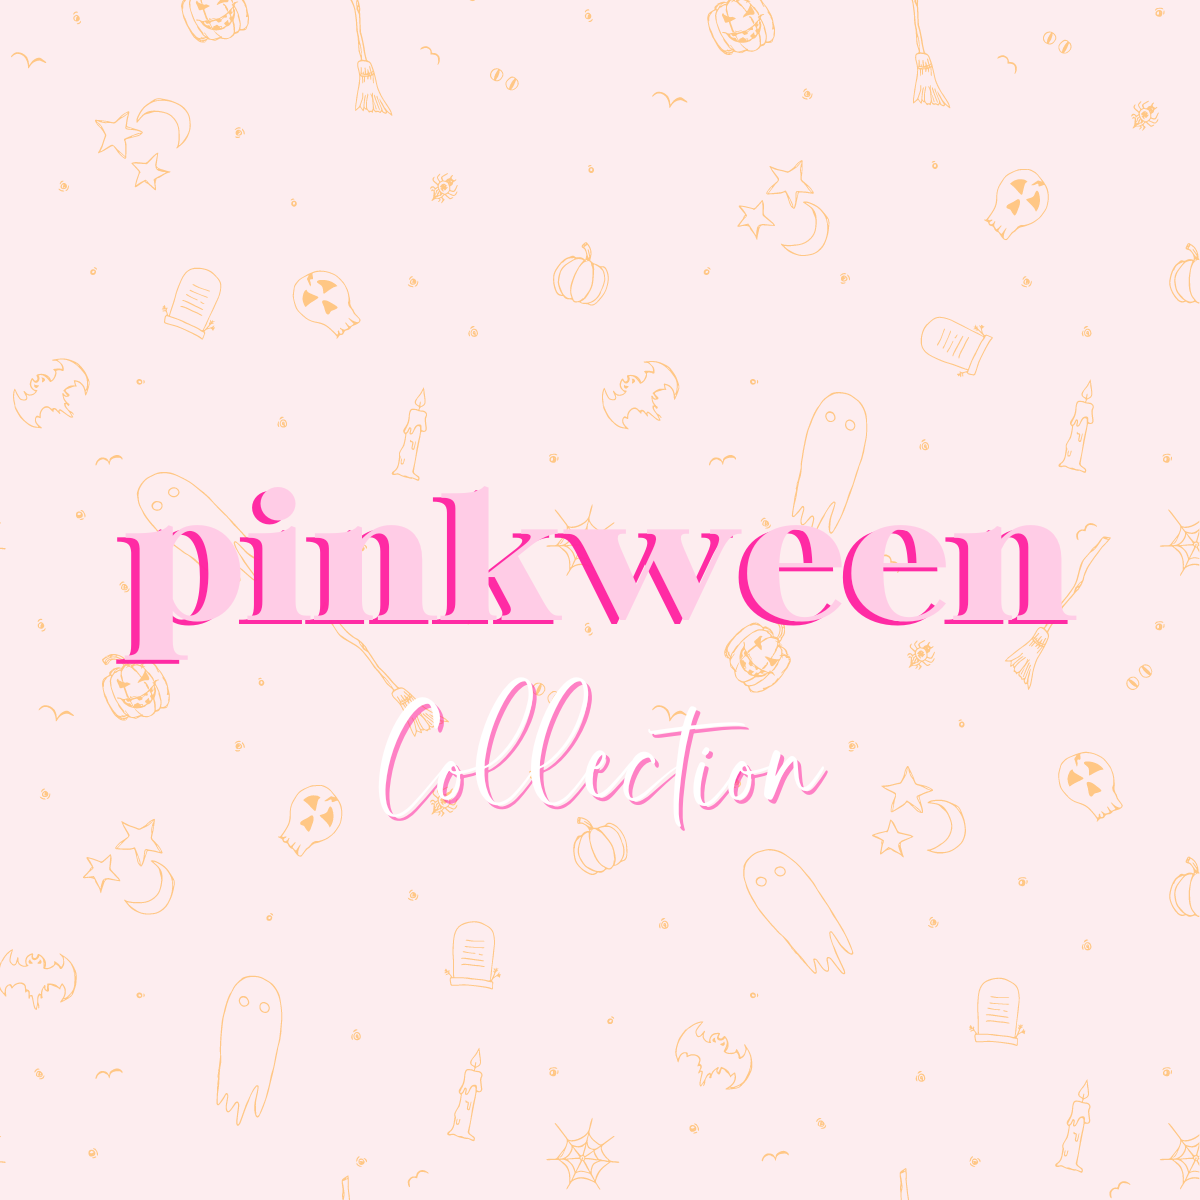 Mell's Pinkween Collection